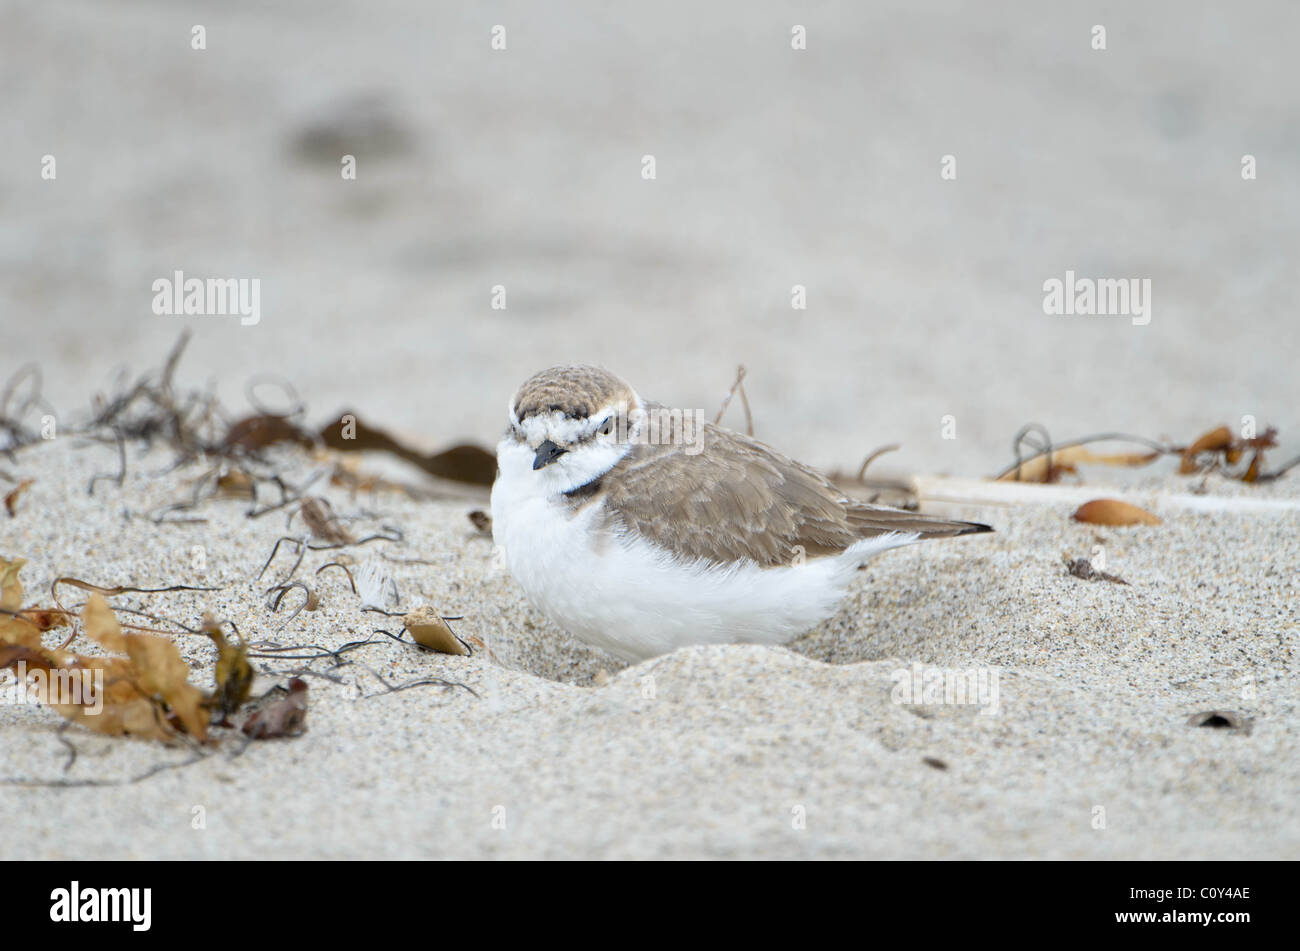 Snowy Plover in sand Stock Photo